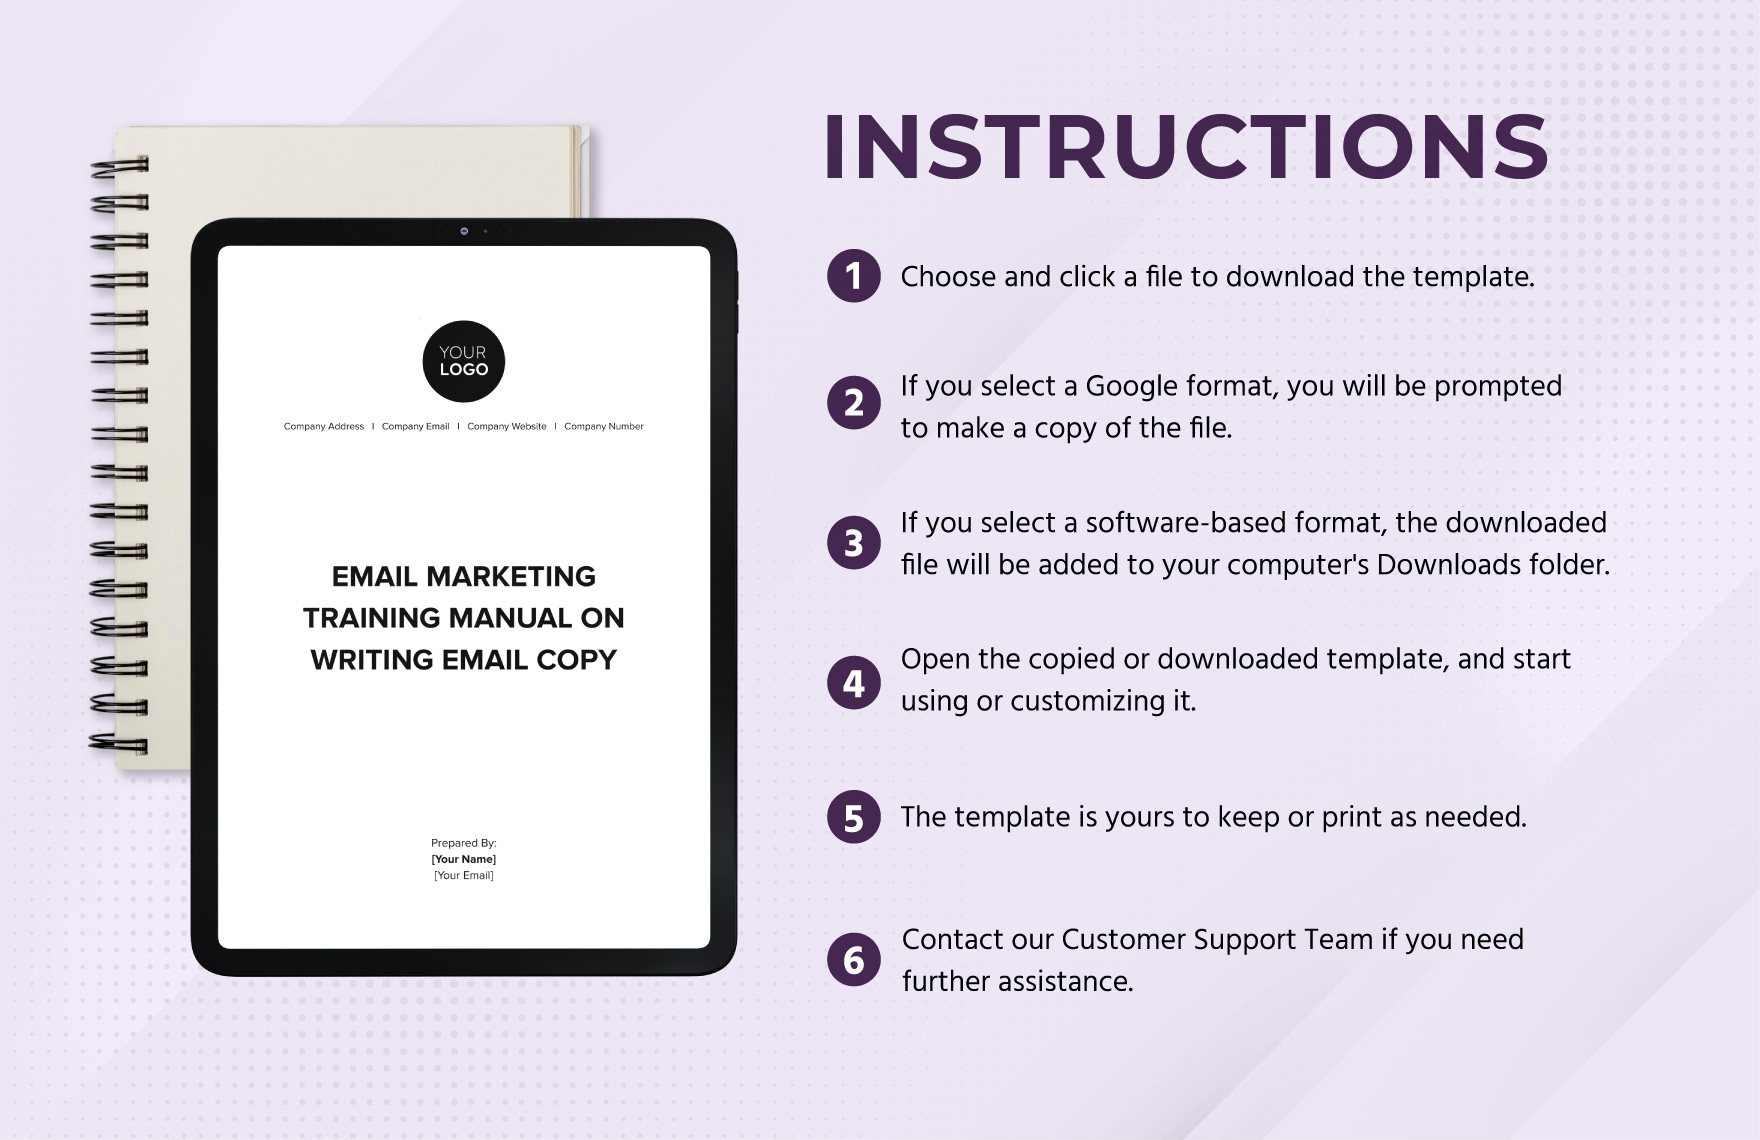 Email Marketing Training Manual on Writing Email Copy Template